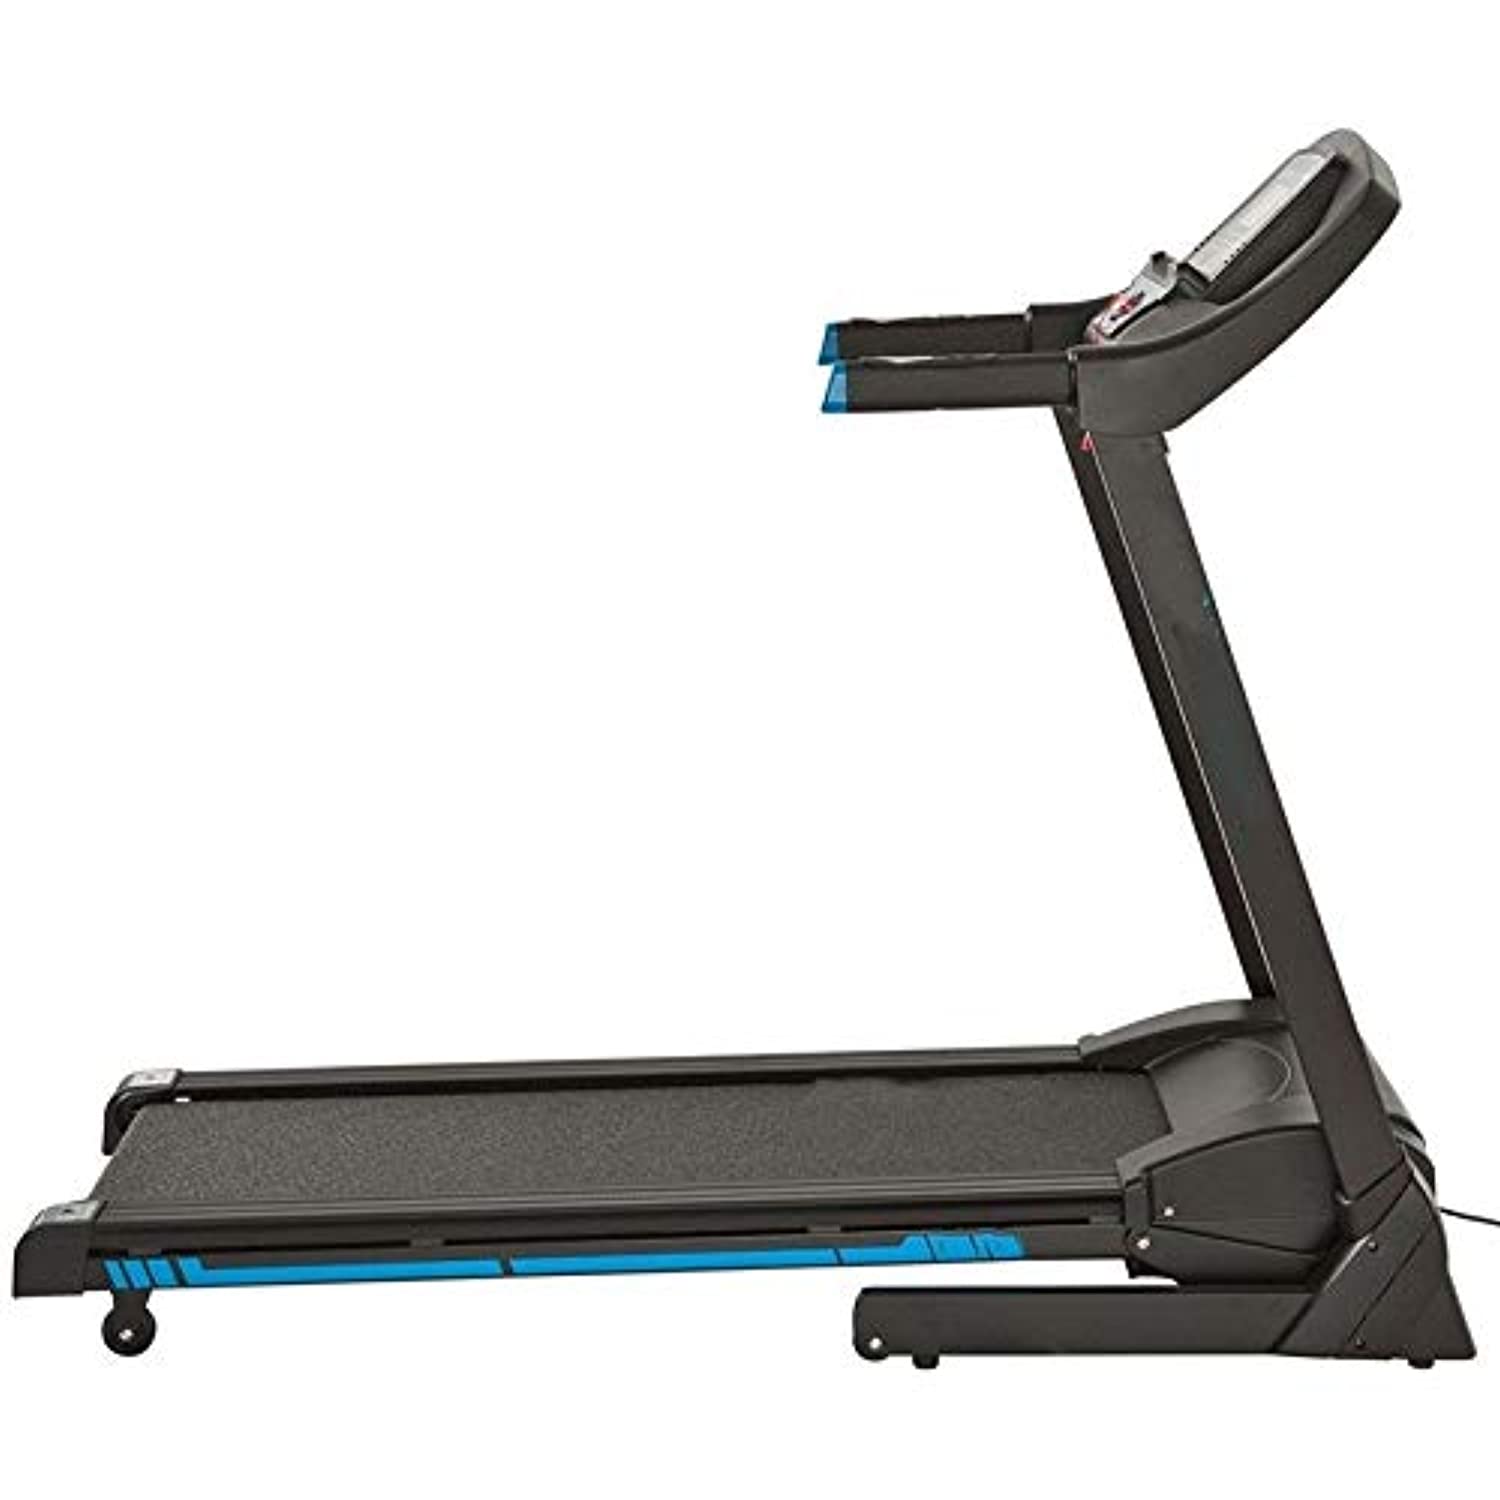 Zzfni Treadmill Folding Treadmills, Exercise to Lose Weight Home Fitness Equipment, Multi-Function Electric Mute Walking Machine Foldable Treadmill